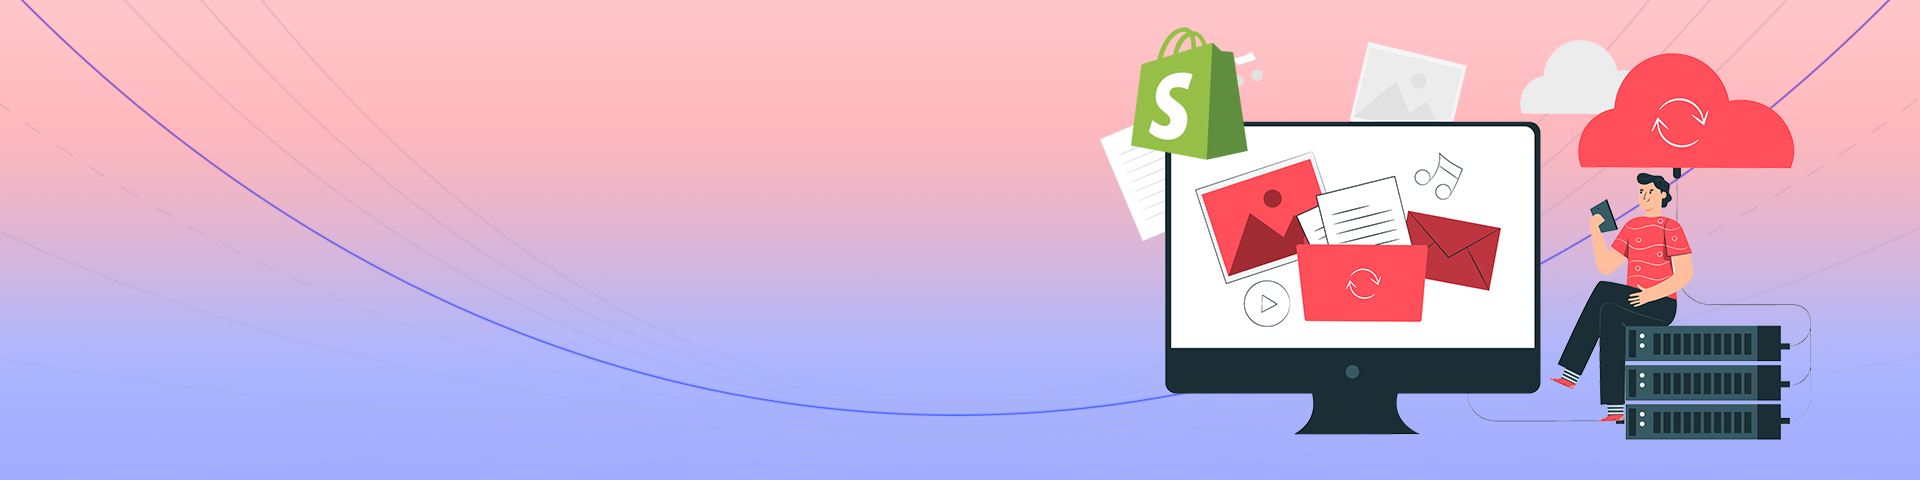 Definitive-Guide-on-Migrating-to-Shopify-banner